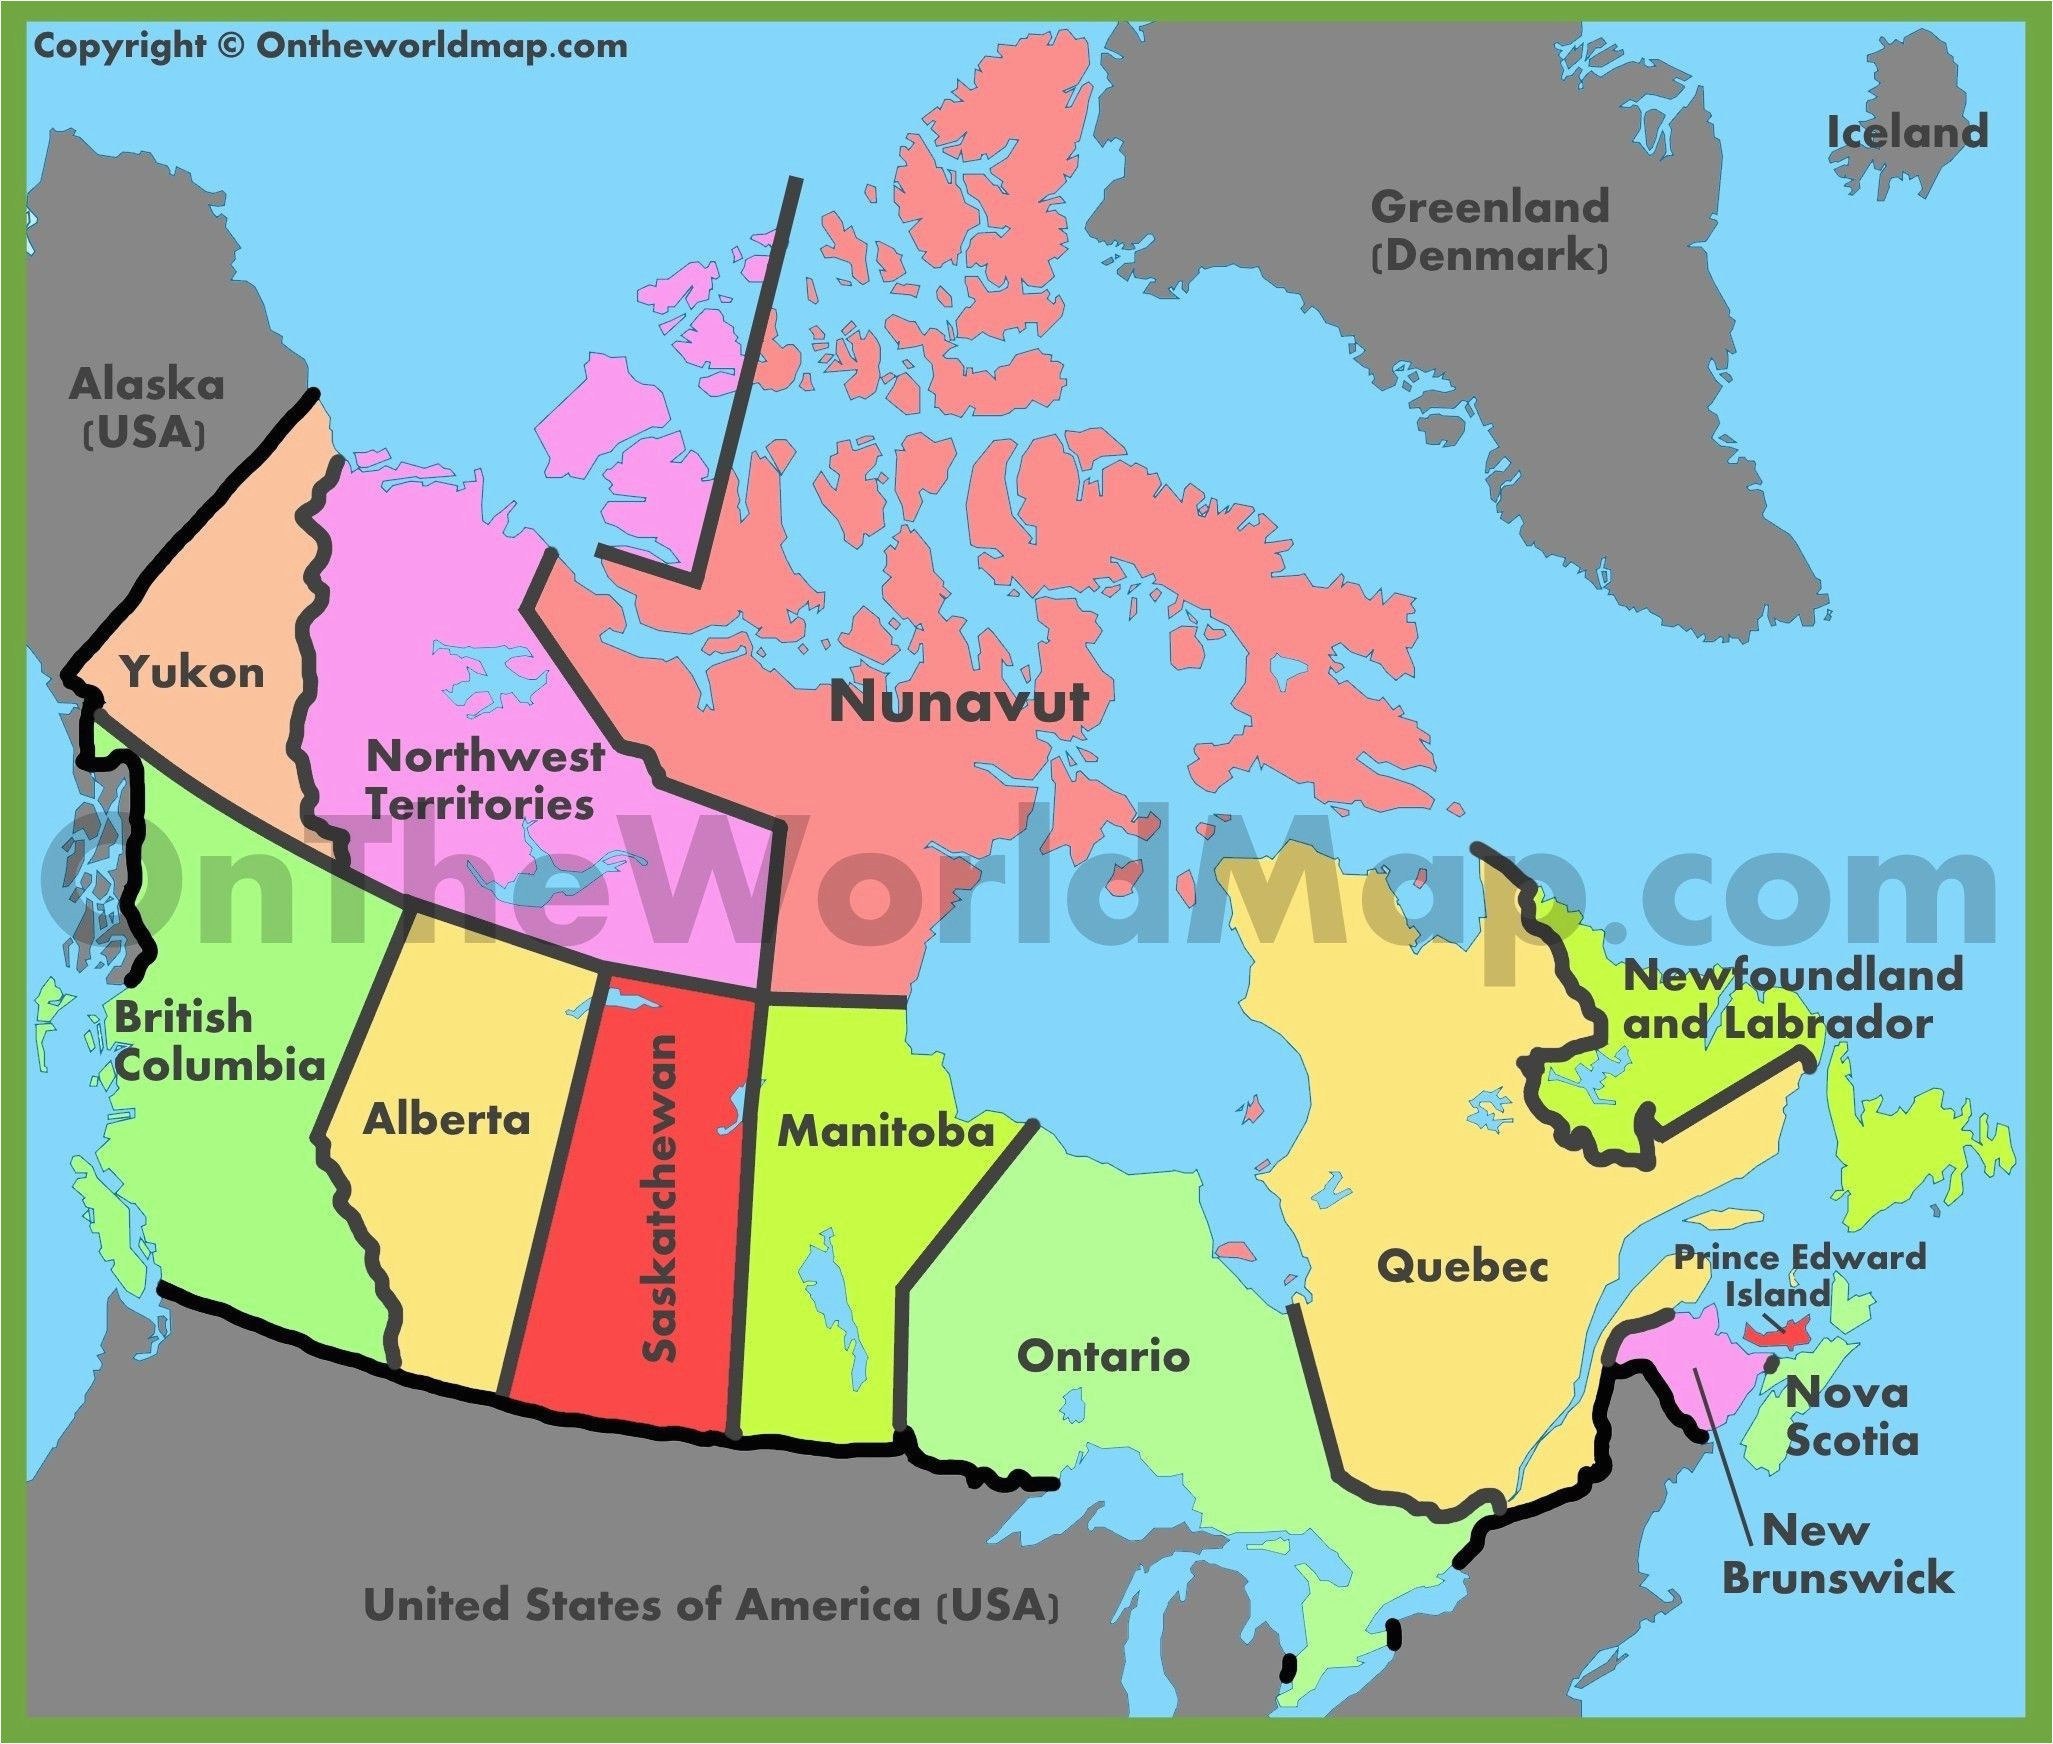 us consulate in canada map fresh new brunswick canada map lovely us